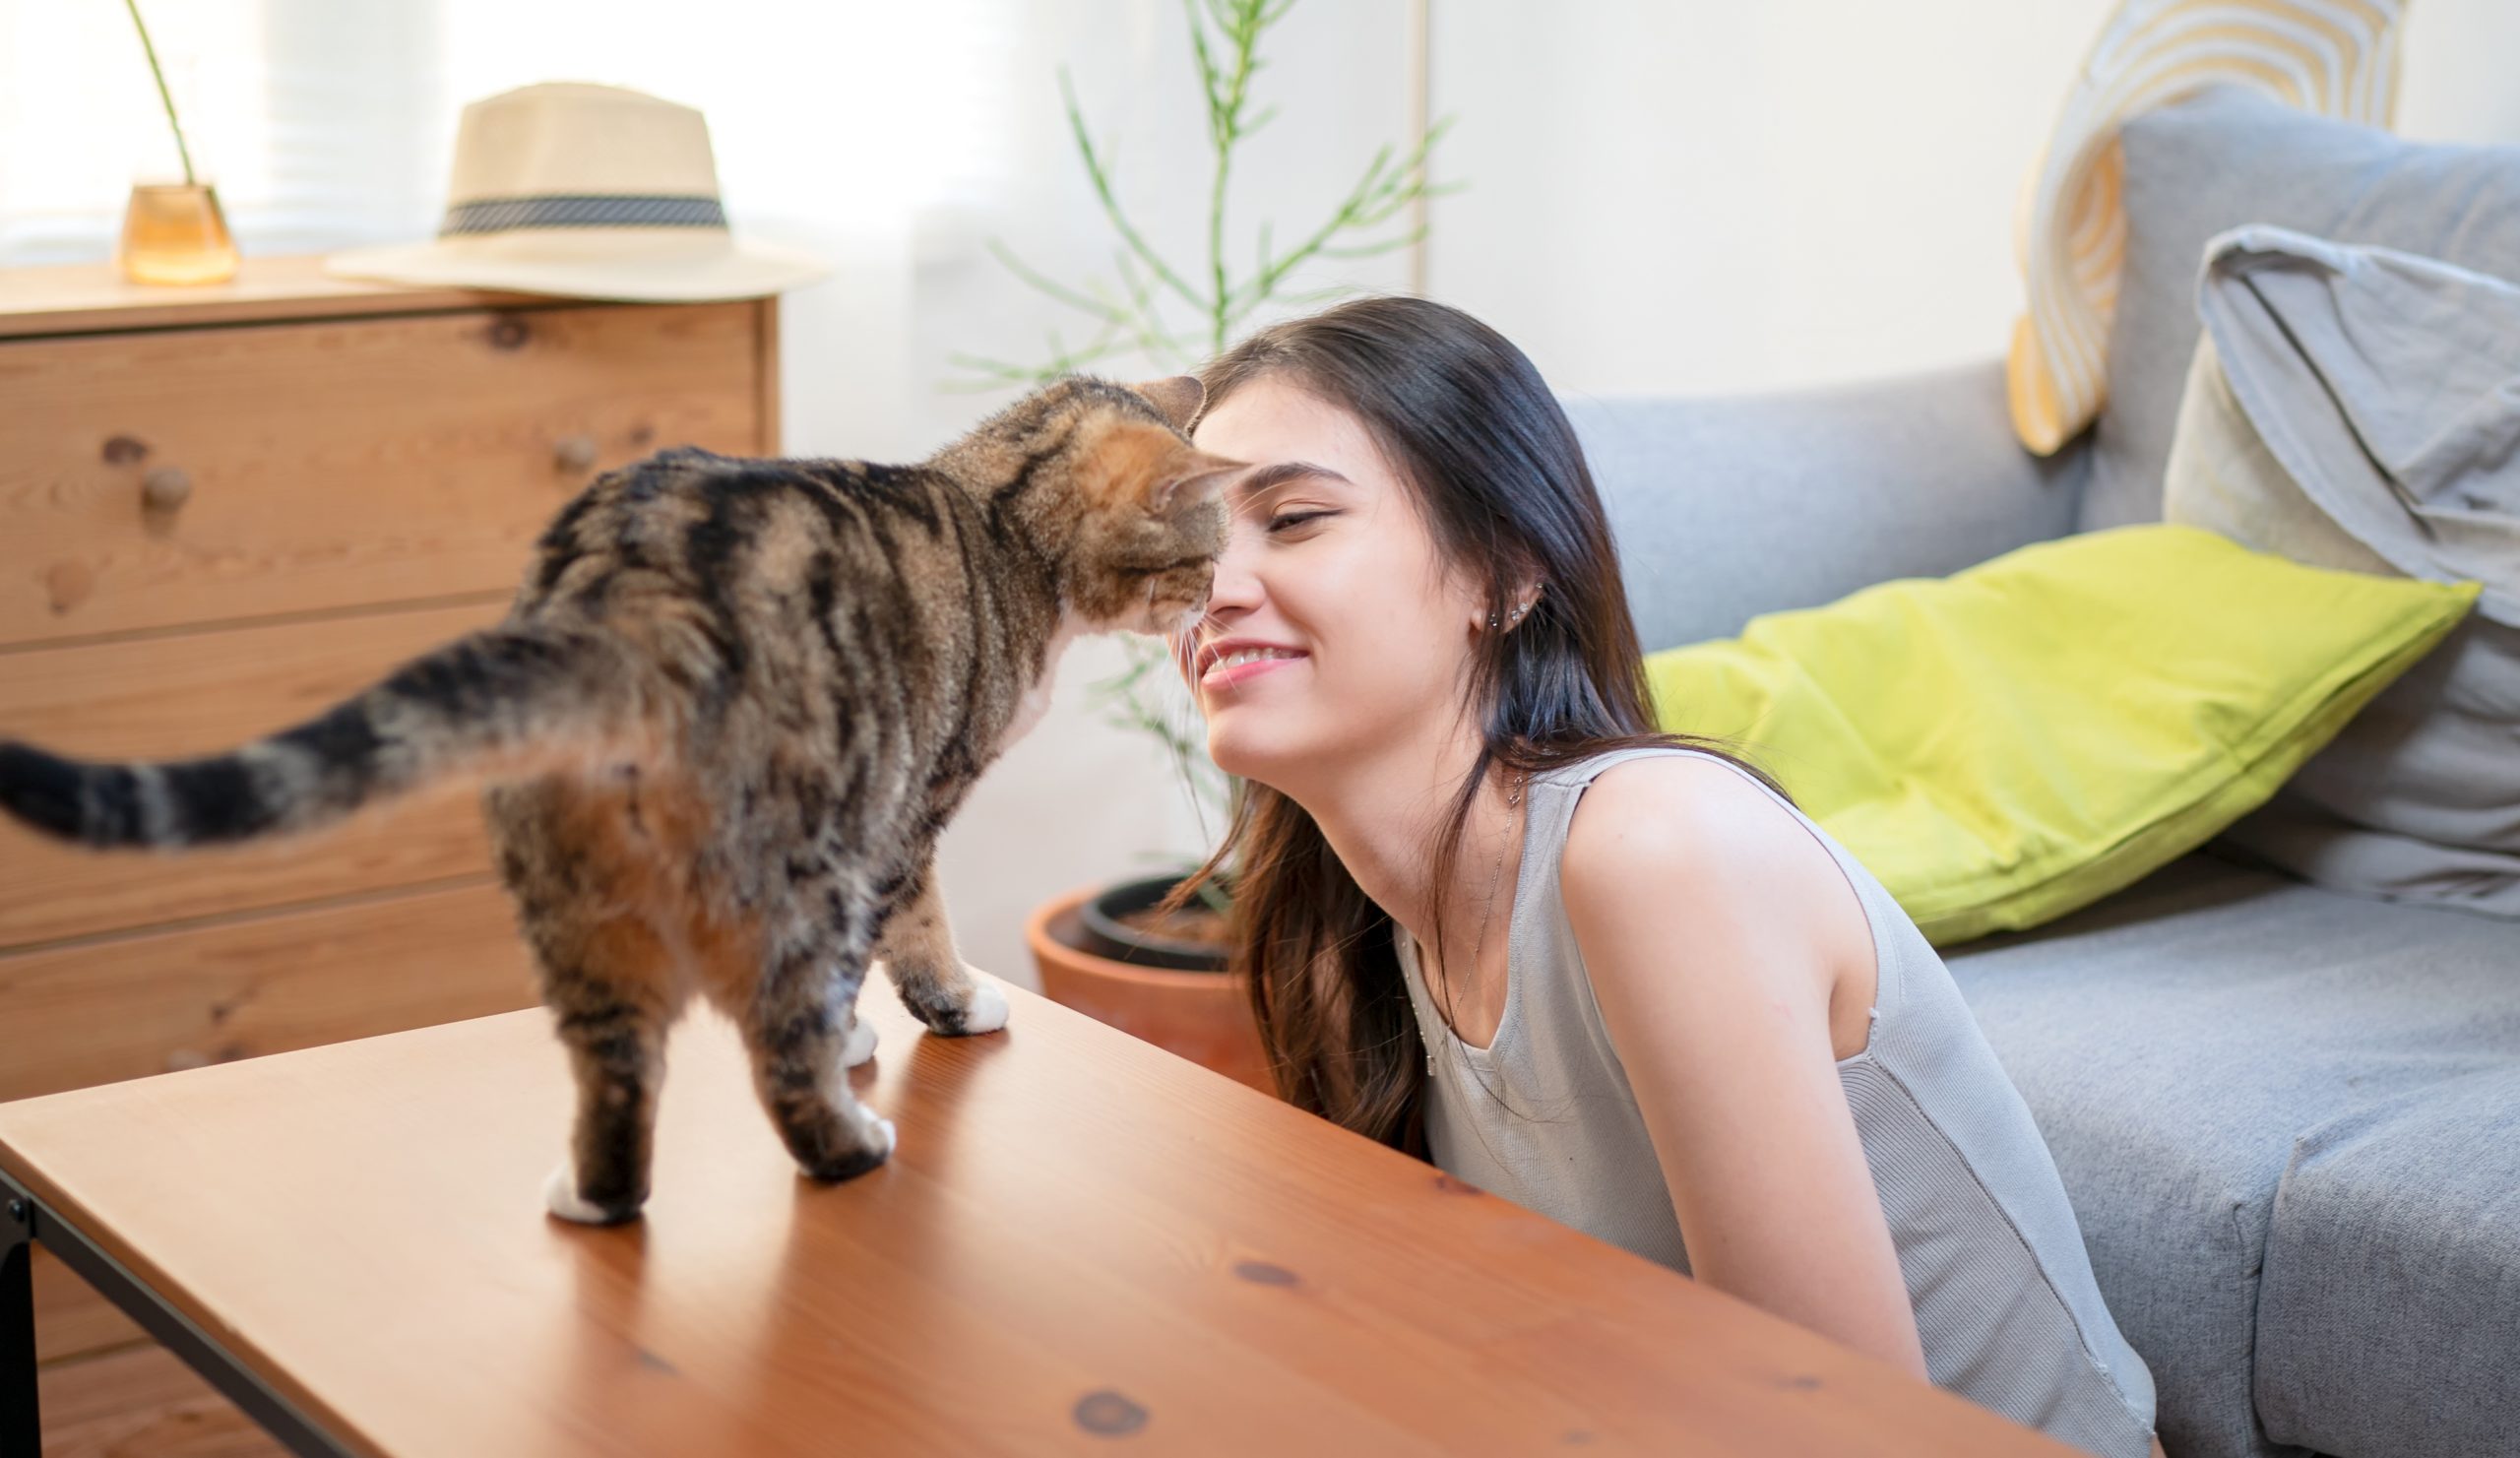 What does it mean when a cat headbutts you?